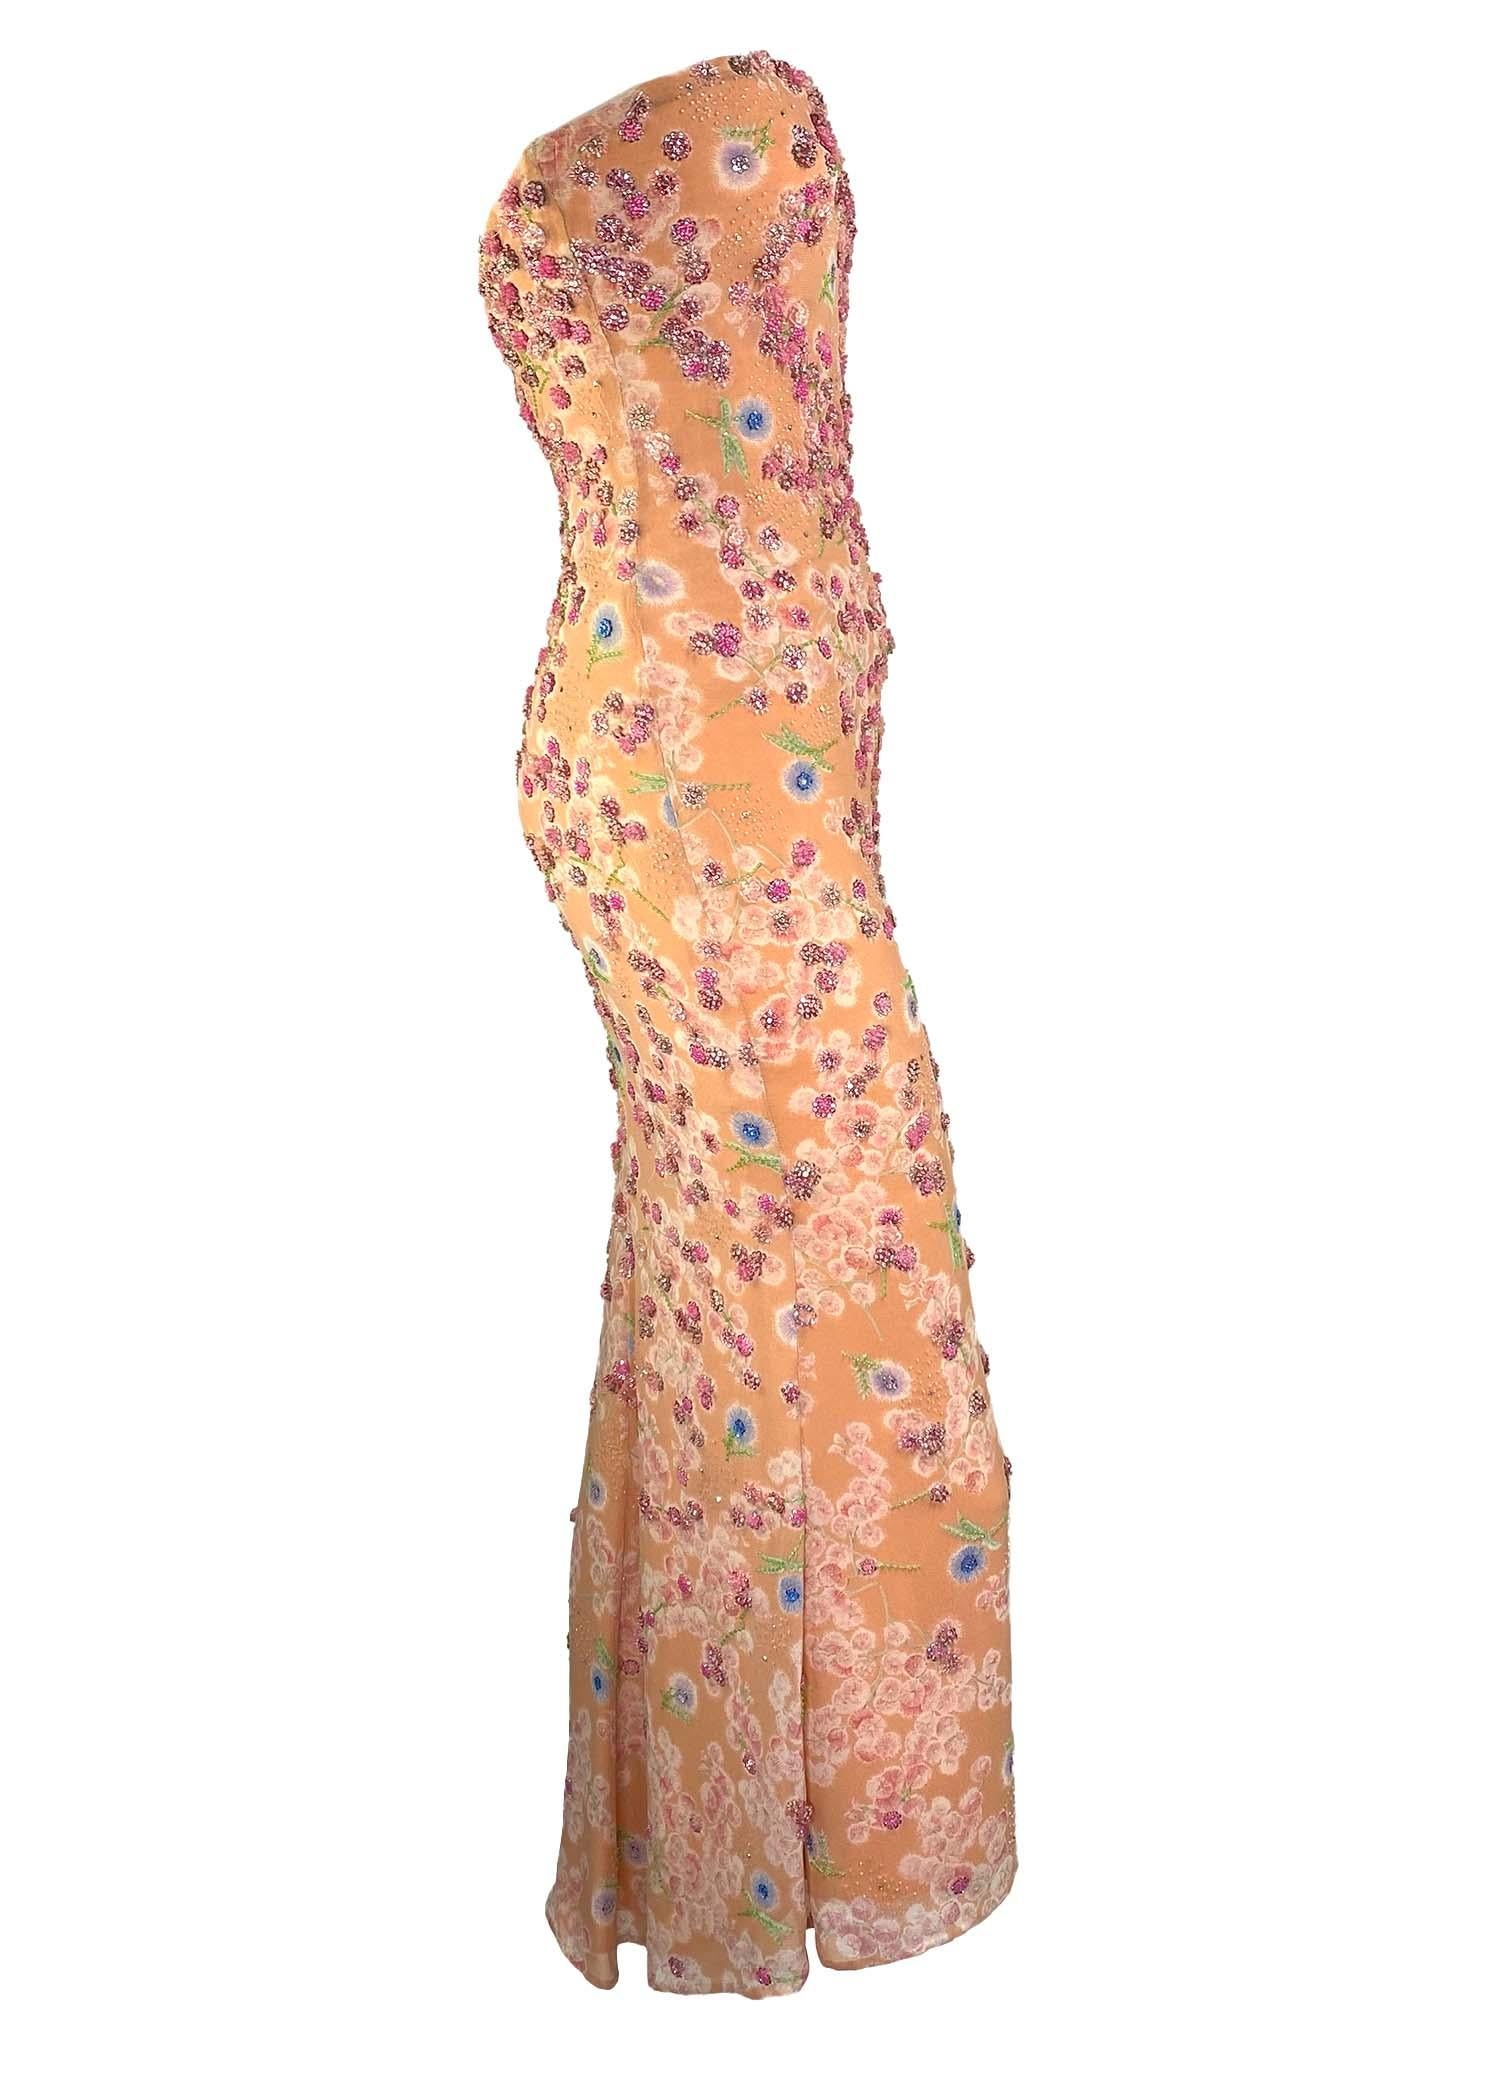 Beige S/S 1997 Atelier Versace by Gianni Beaded Floral Dress Corset Removable Strap For Sale